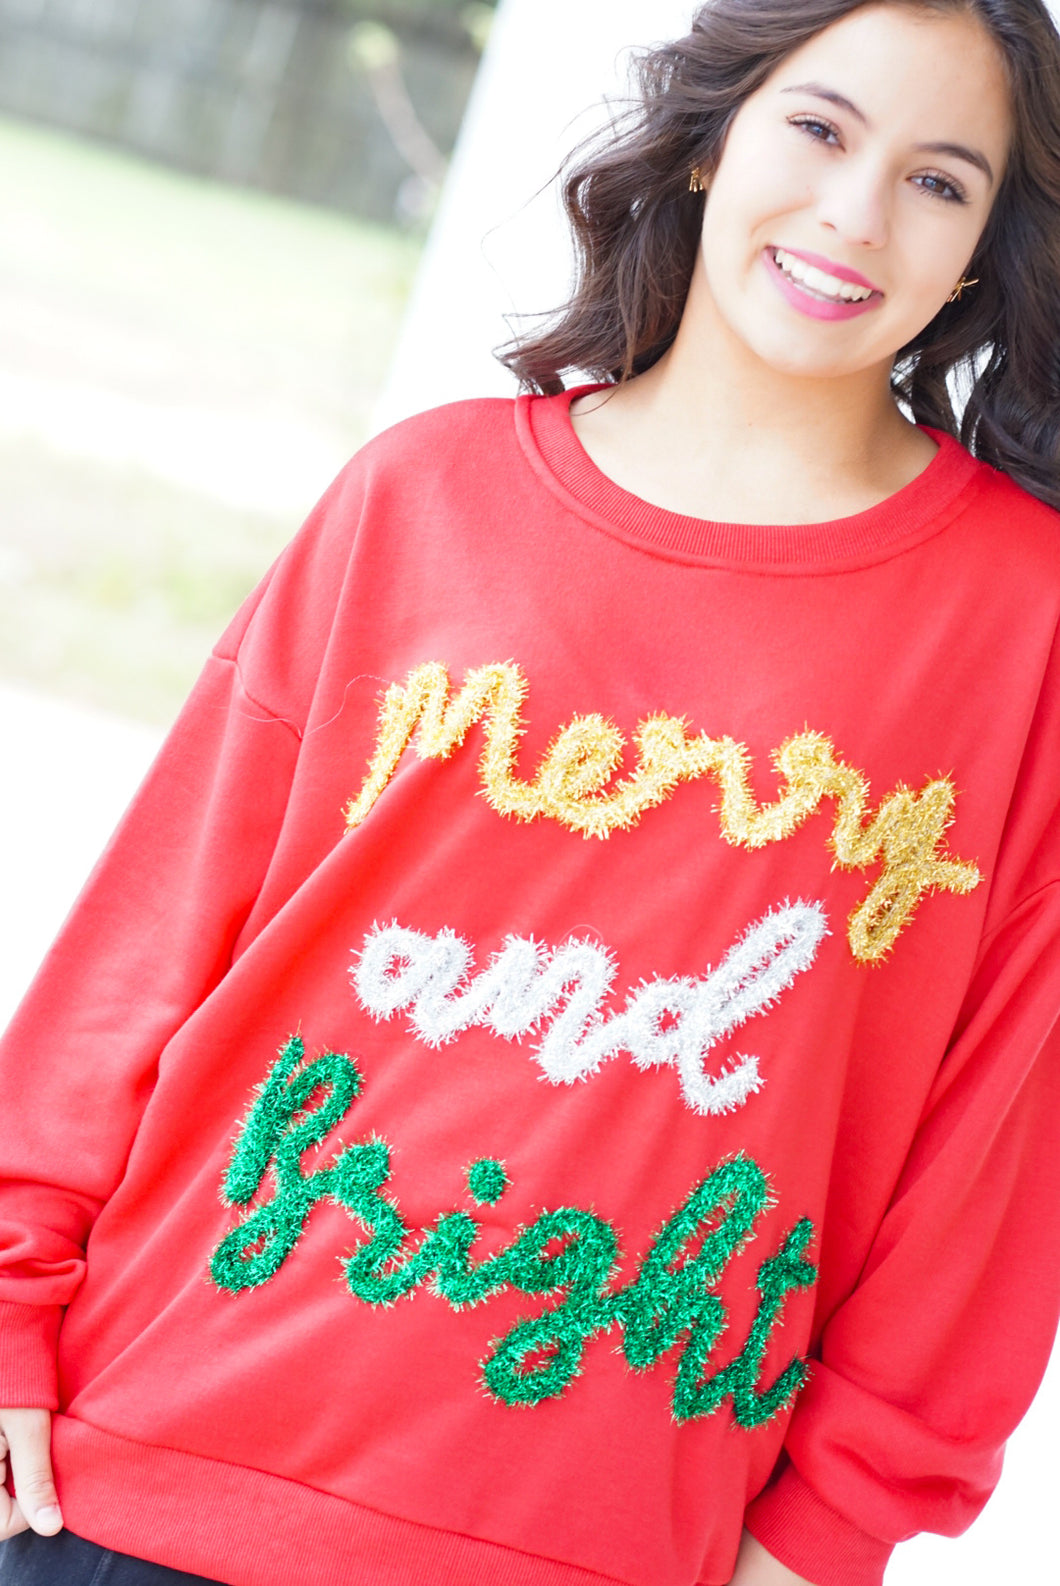 Merry and Bright Pullover